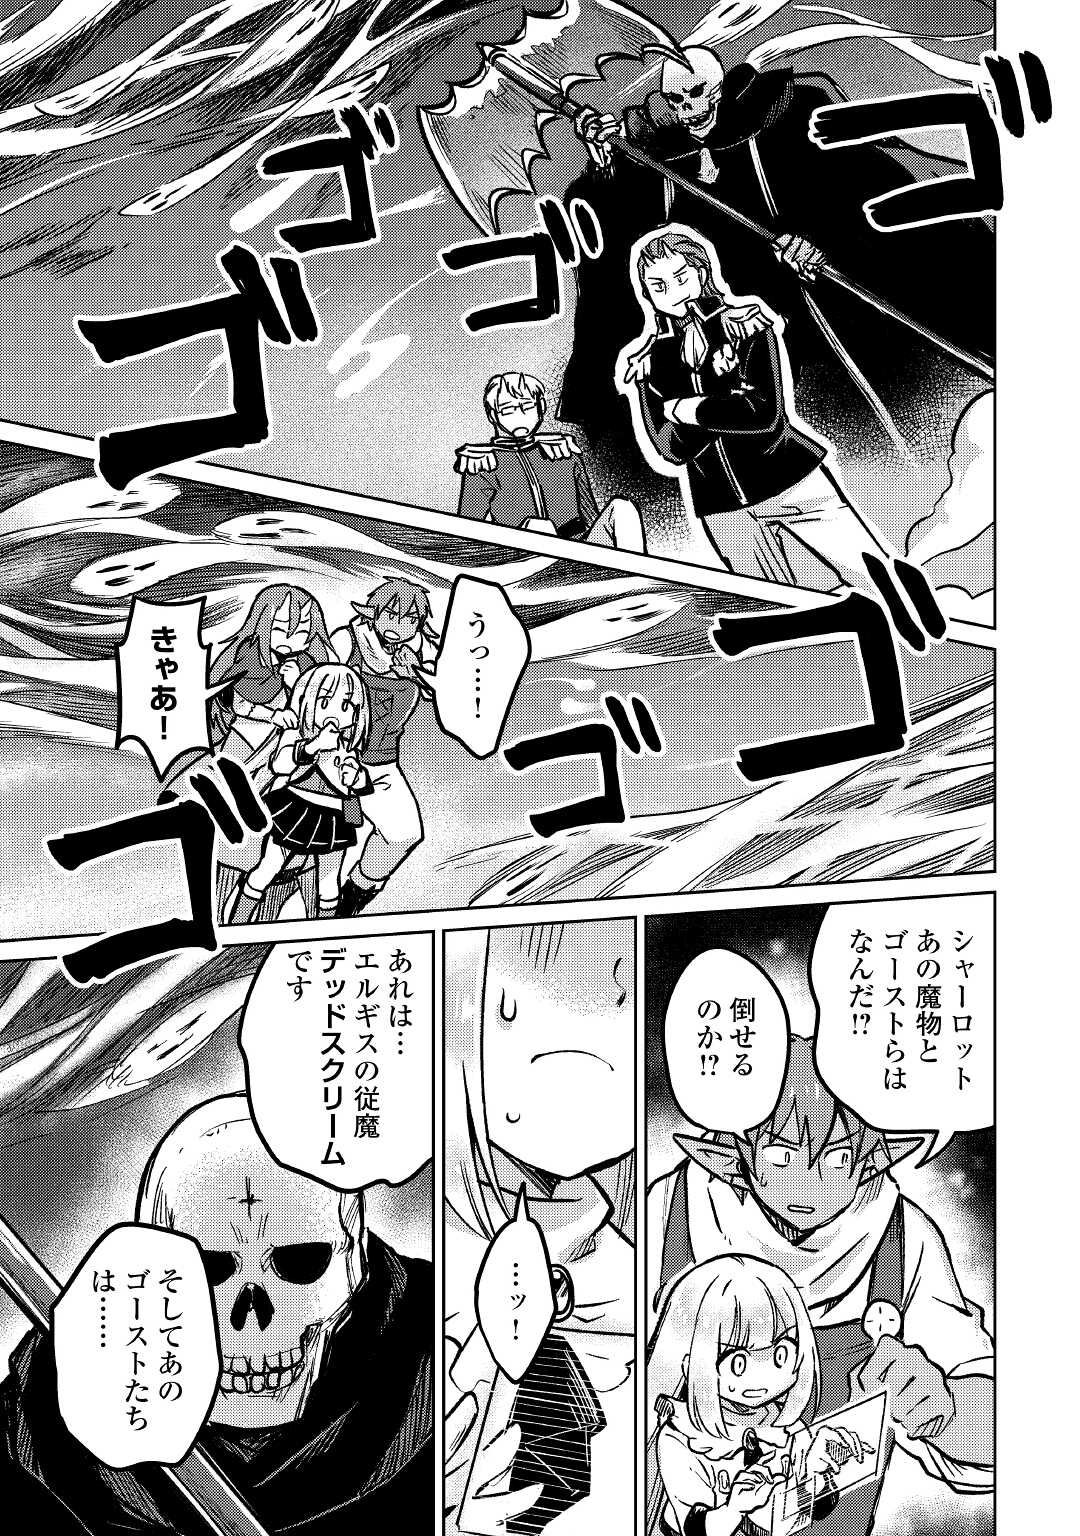 The Former Structural Researcher’s Story of Otherworldly Adventure 第39話 - Page 19